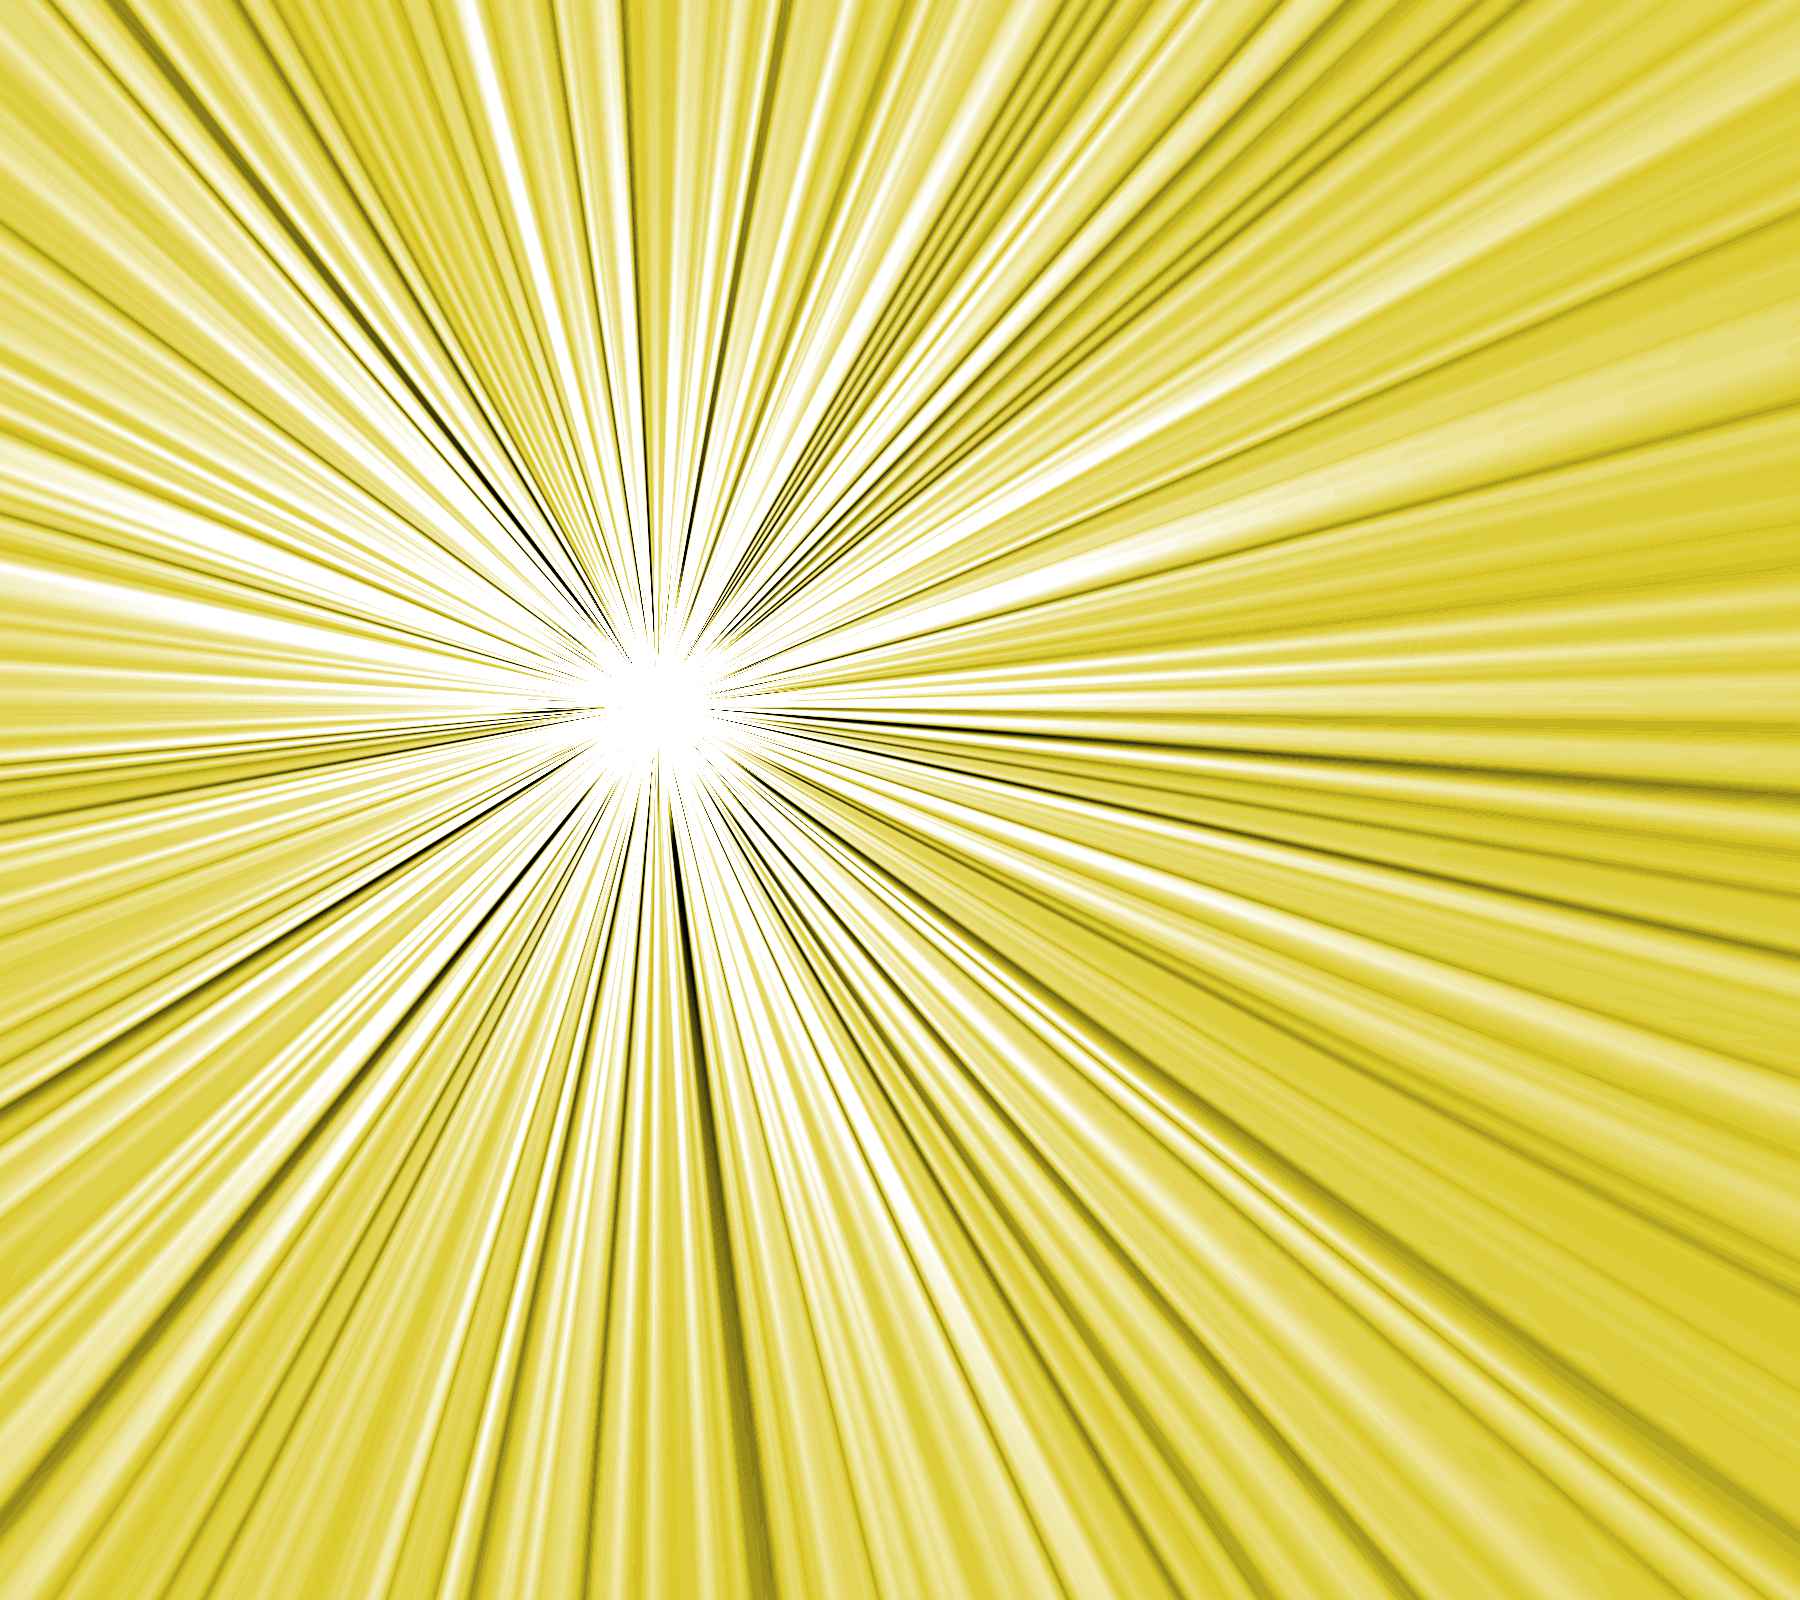 Starburst Backgrounds, Textures, Wallpapers and Background Images